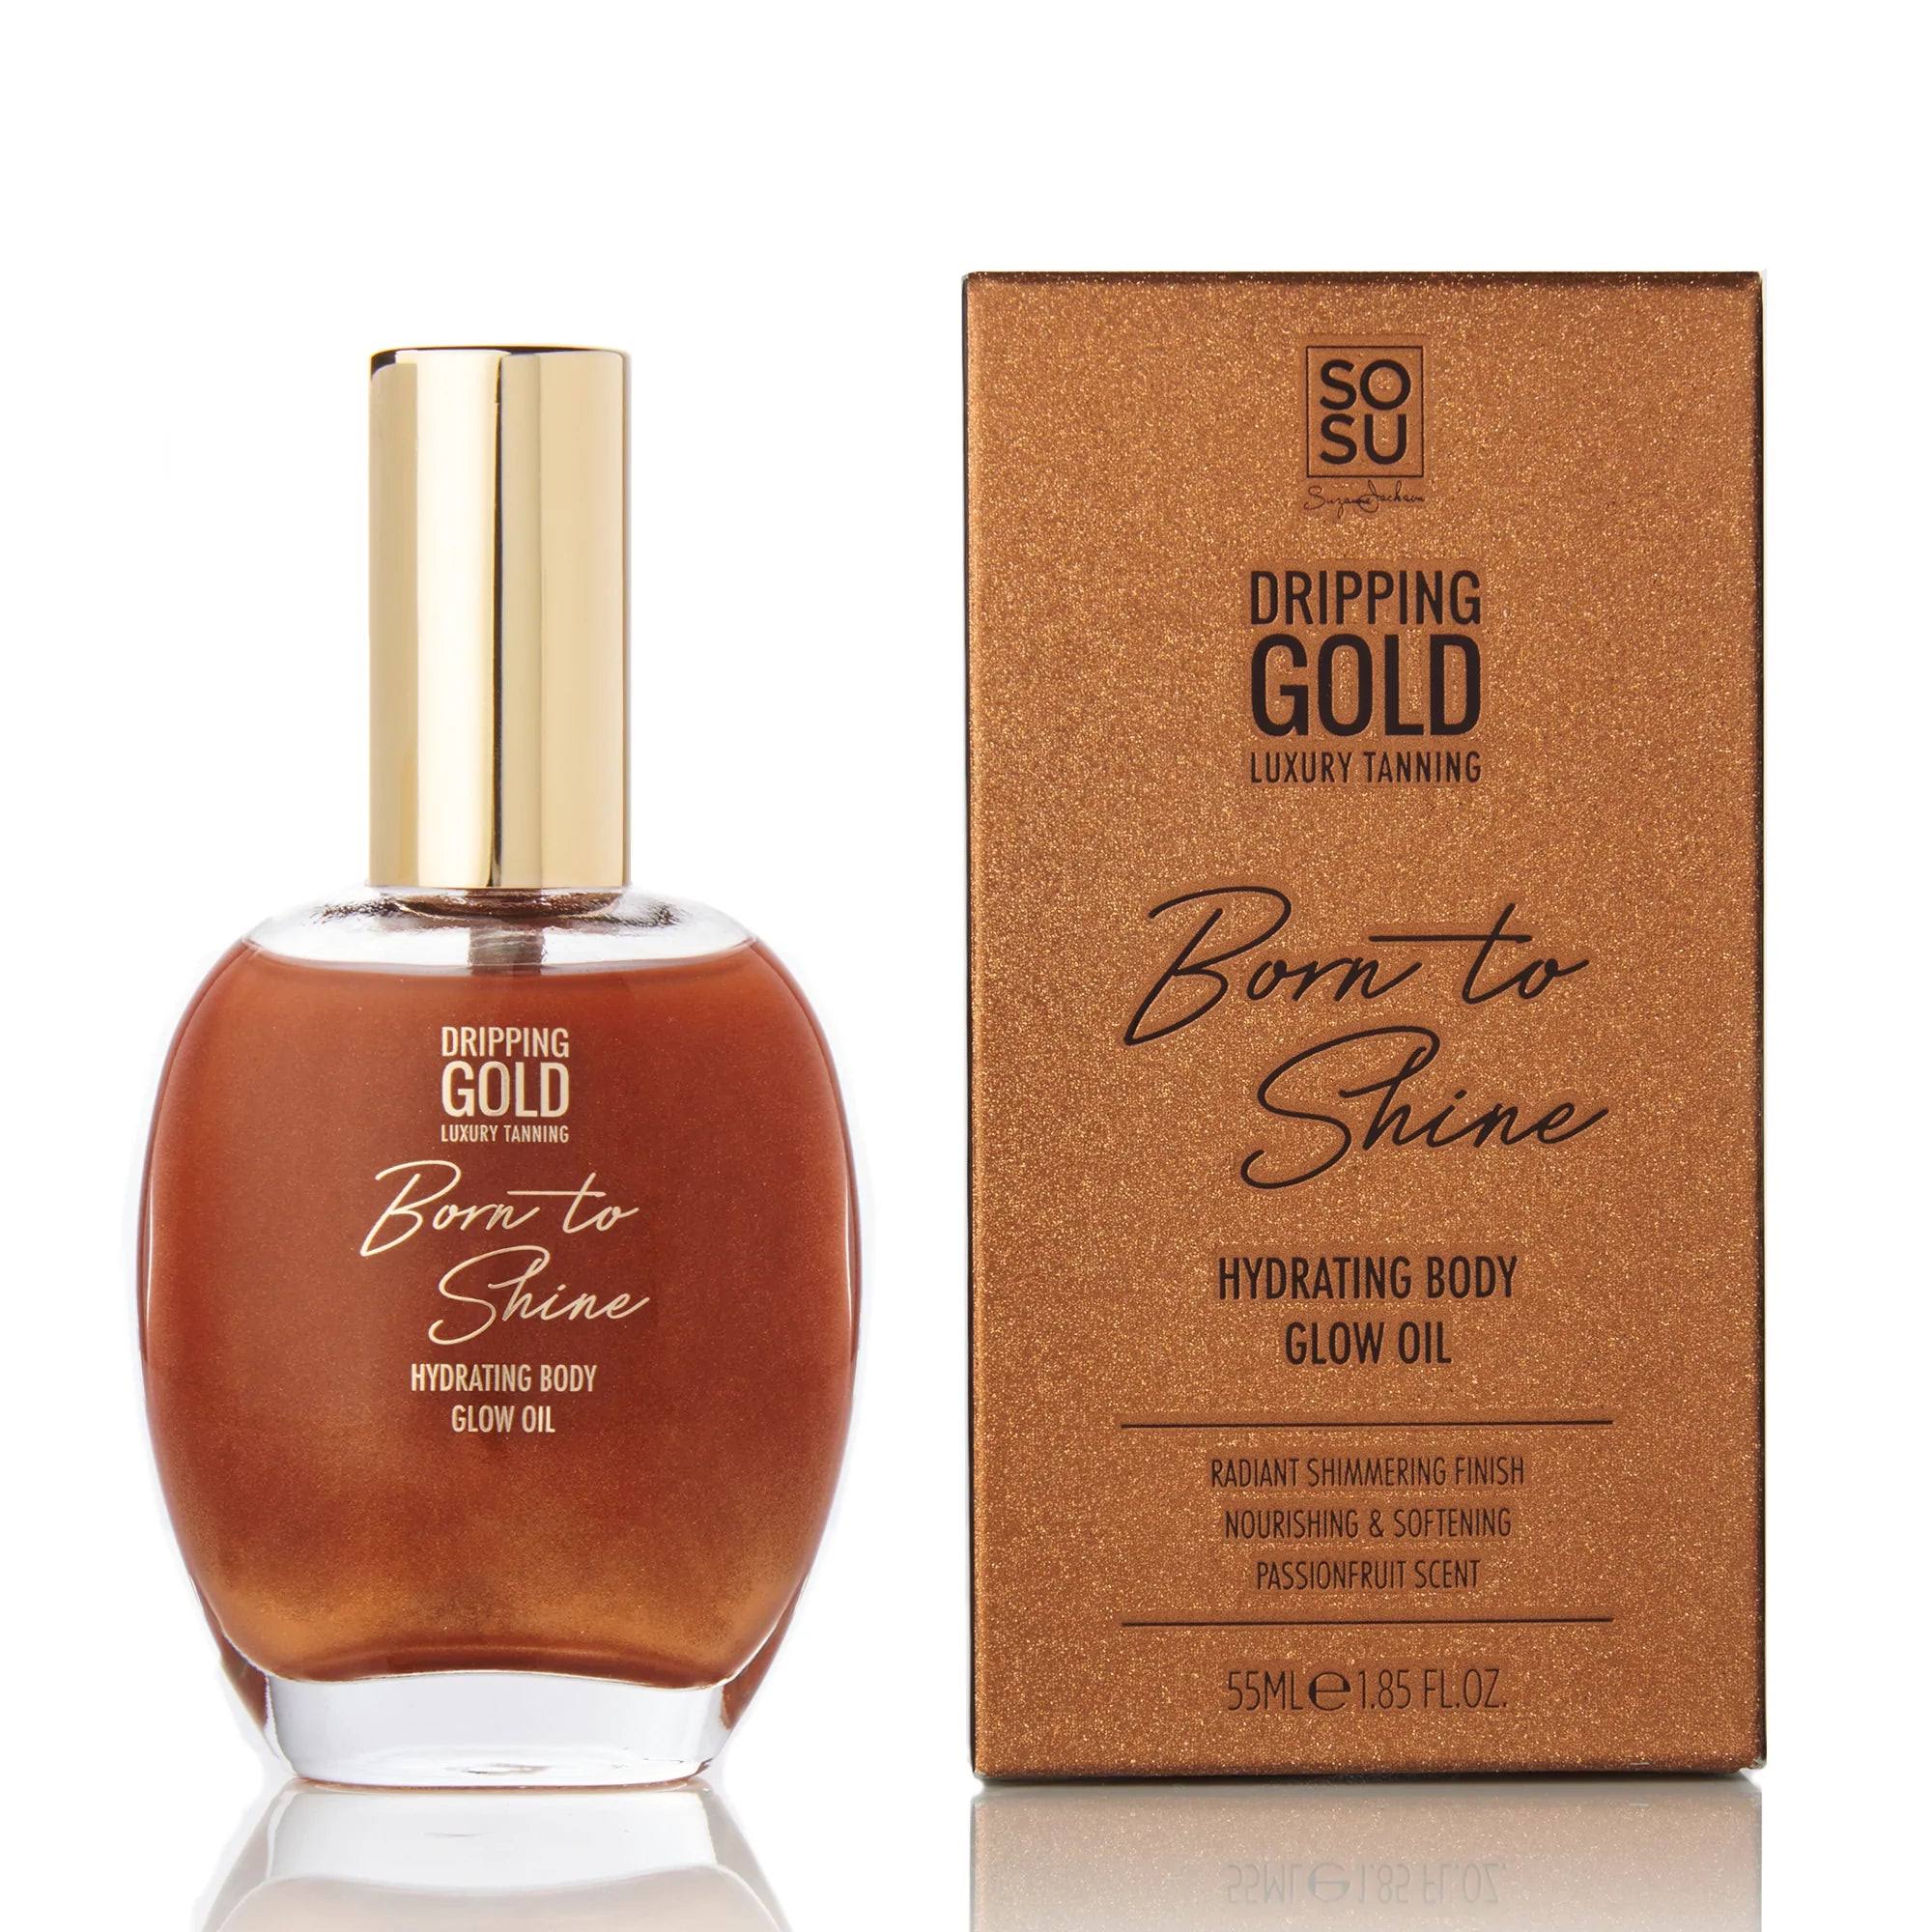 DRIPPING GOLD BORN TO SHINE HYDRATING BODY GLOW OIL